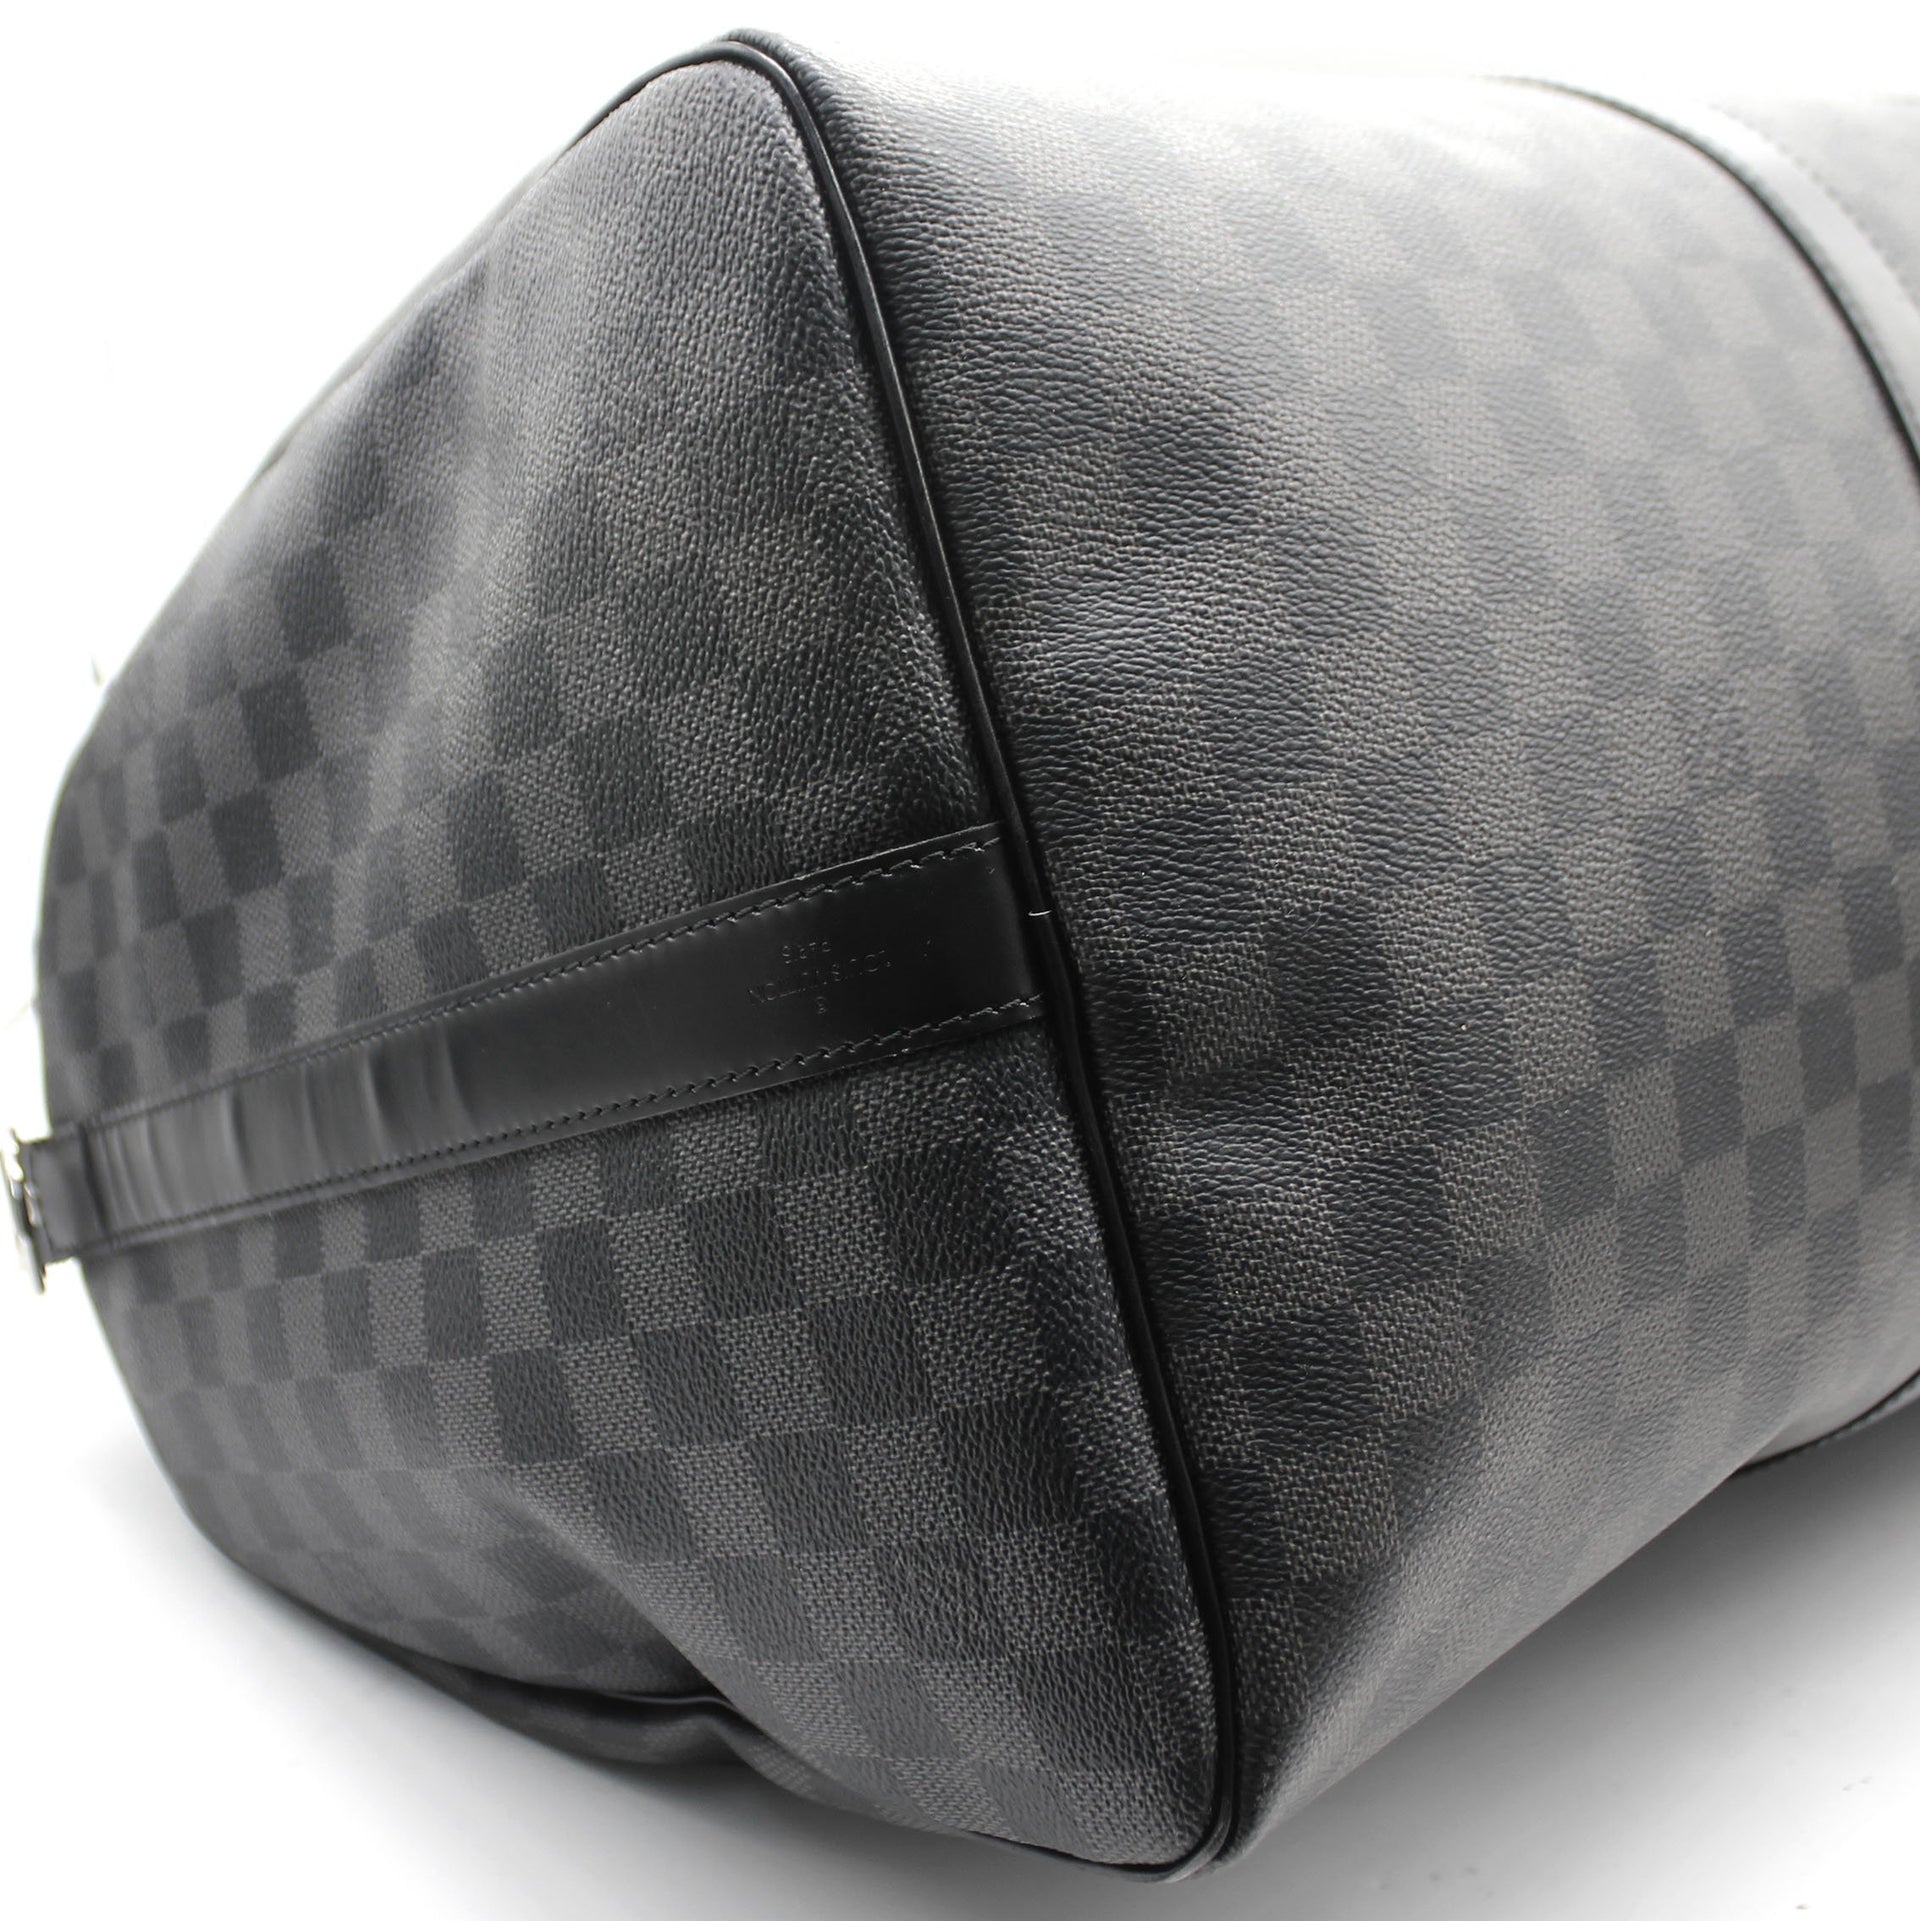 Louis Vuitton Keepall Damier Graphite Bandouliere 55 with Strap